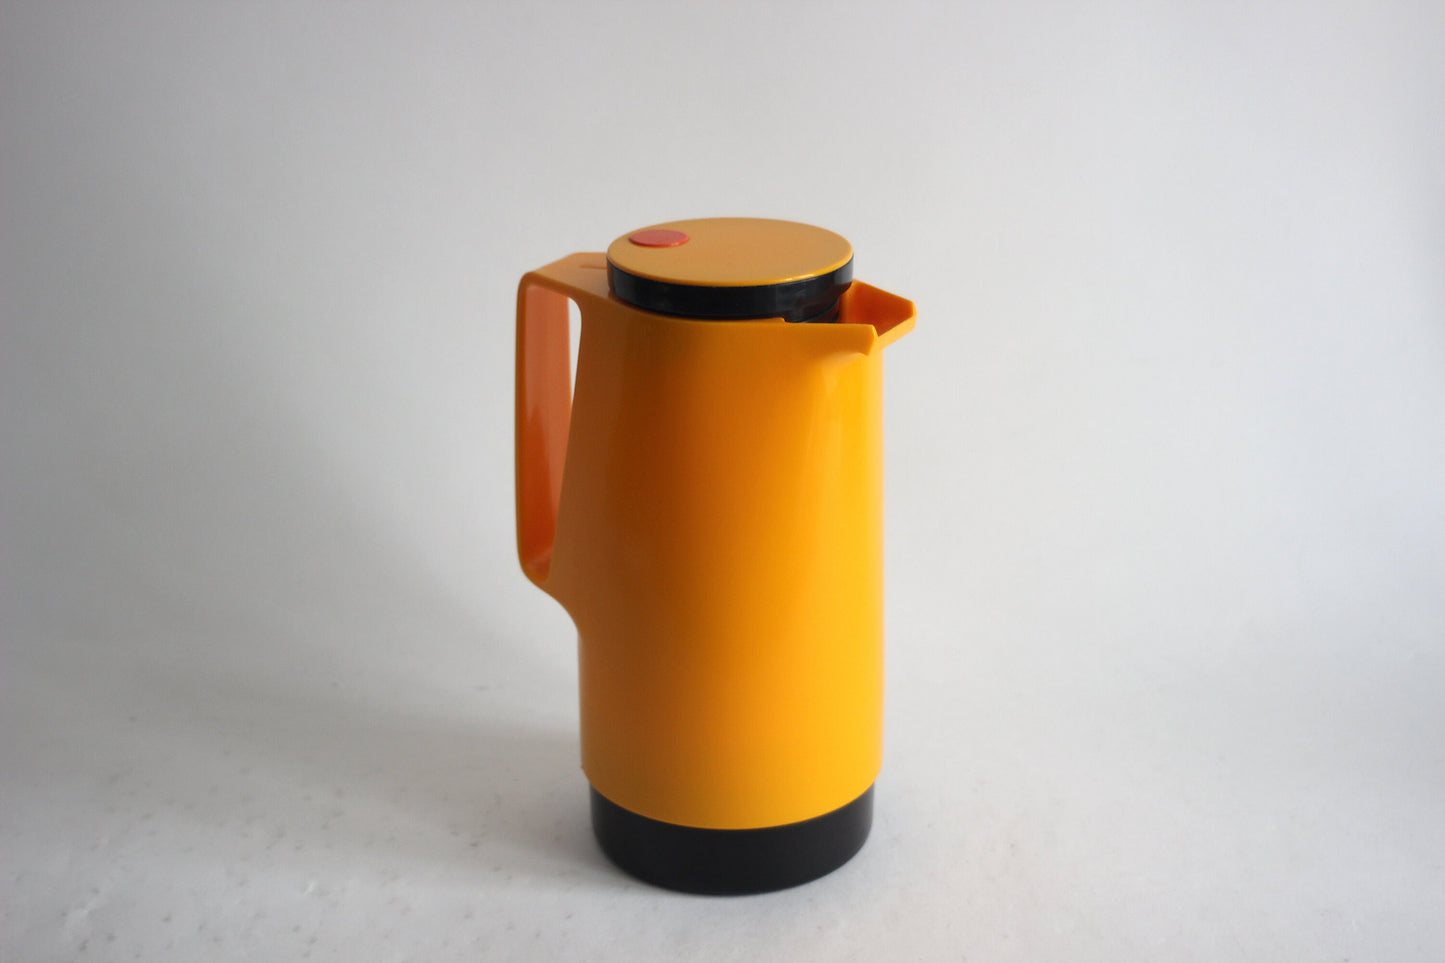 DR ZIMMERMANN Vintage 70s thermos. Orange thermos bottle. Space age design. Made in West Germany.